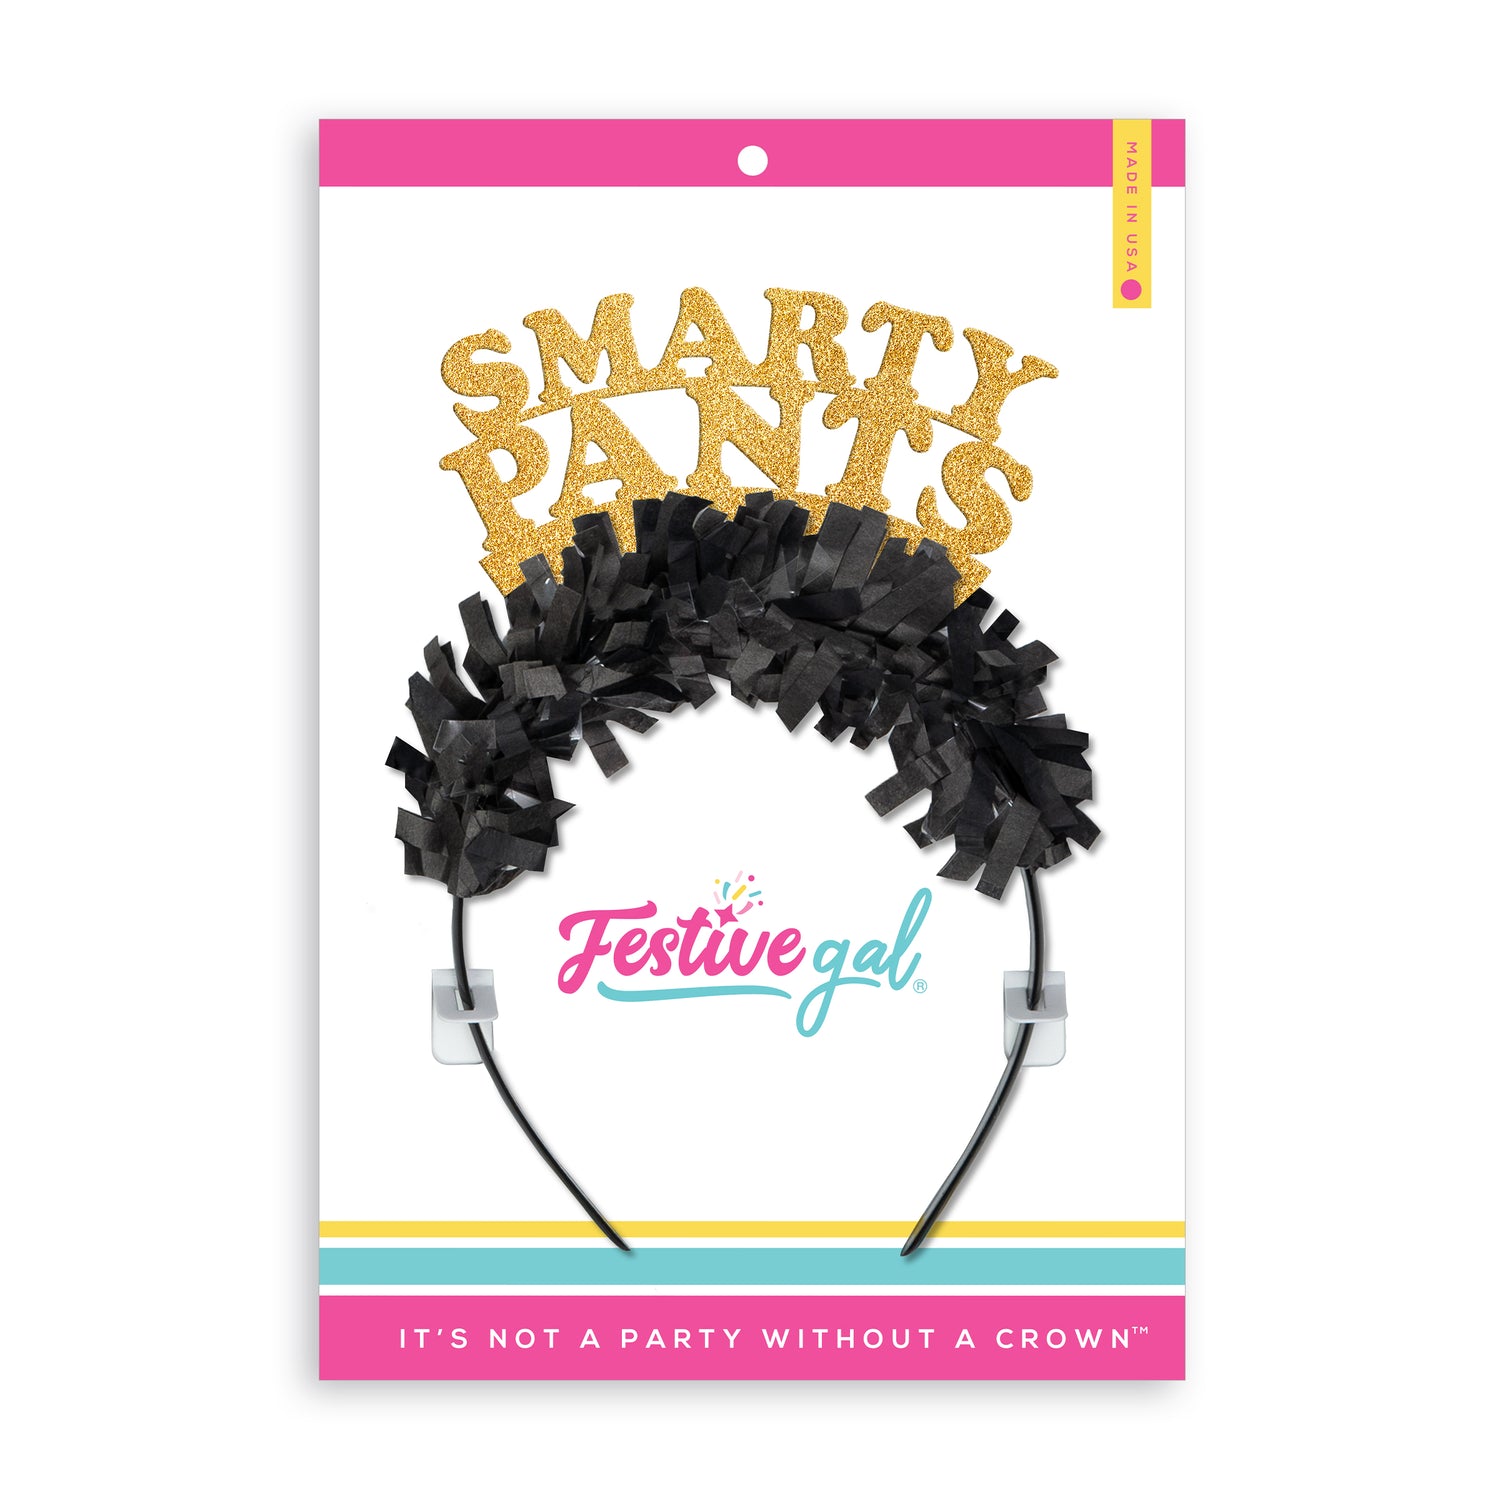 Graduation crown in gold and black that says "Smarty Pants" in Festive Gal packaging.